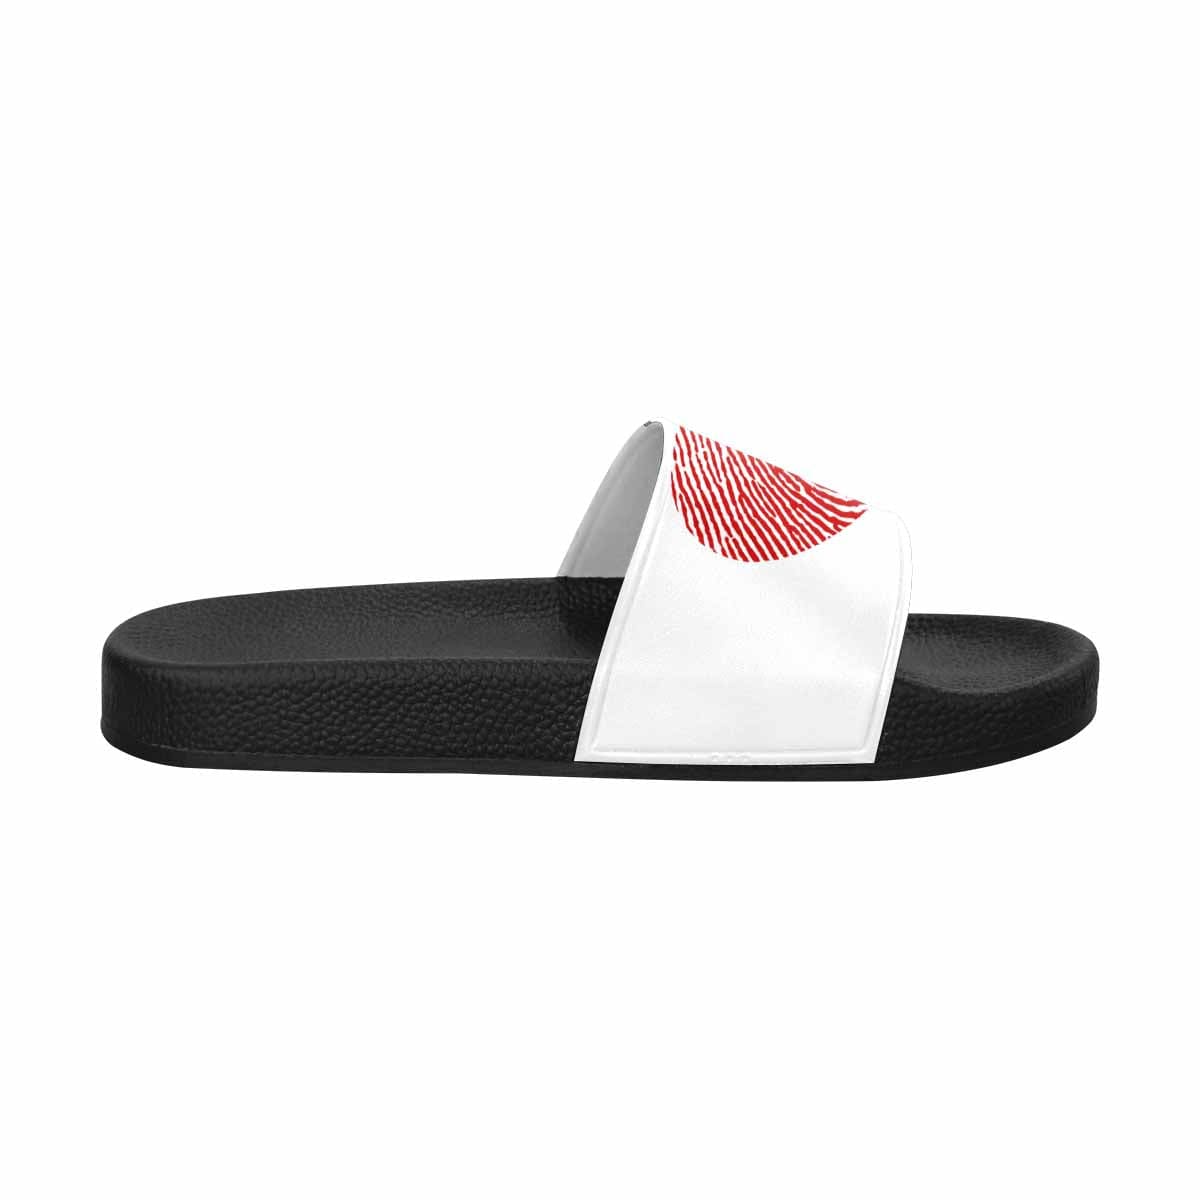 Womens Slide Sandals White And Red Heart - Womens | Slides